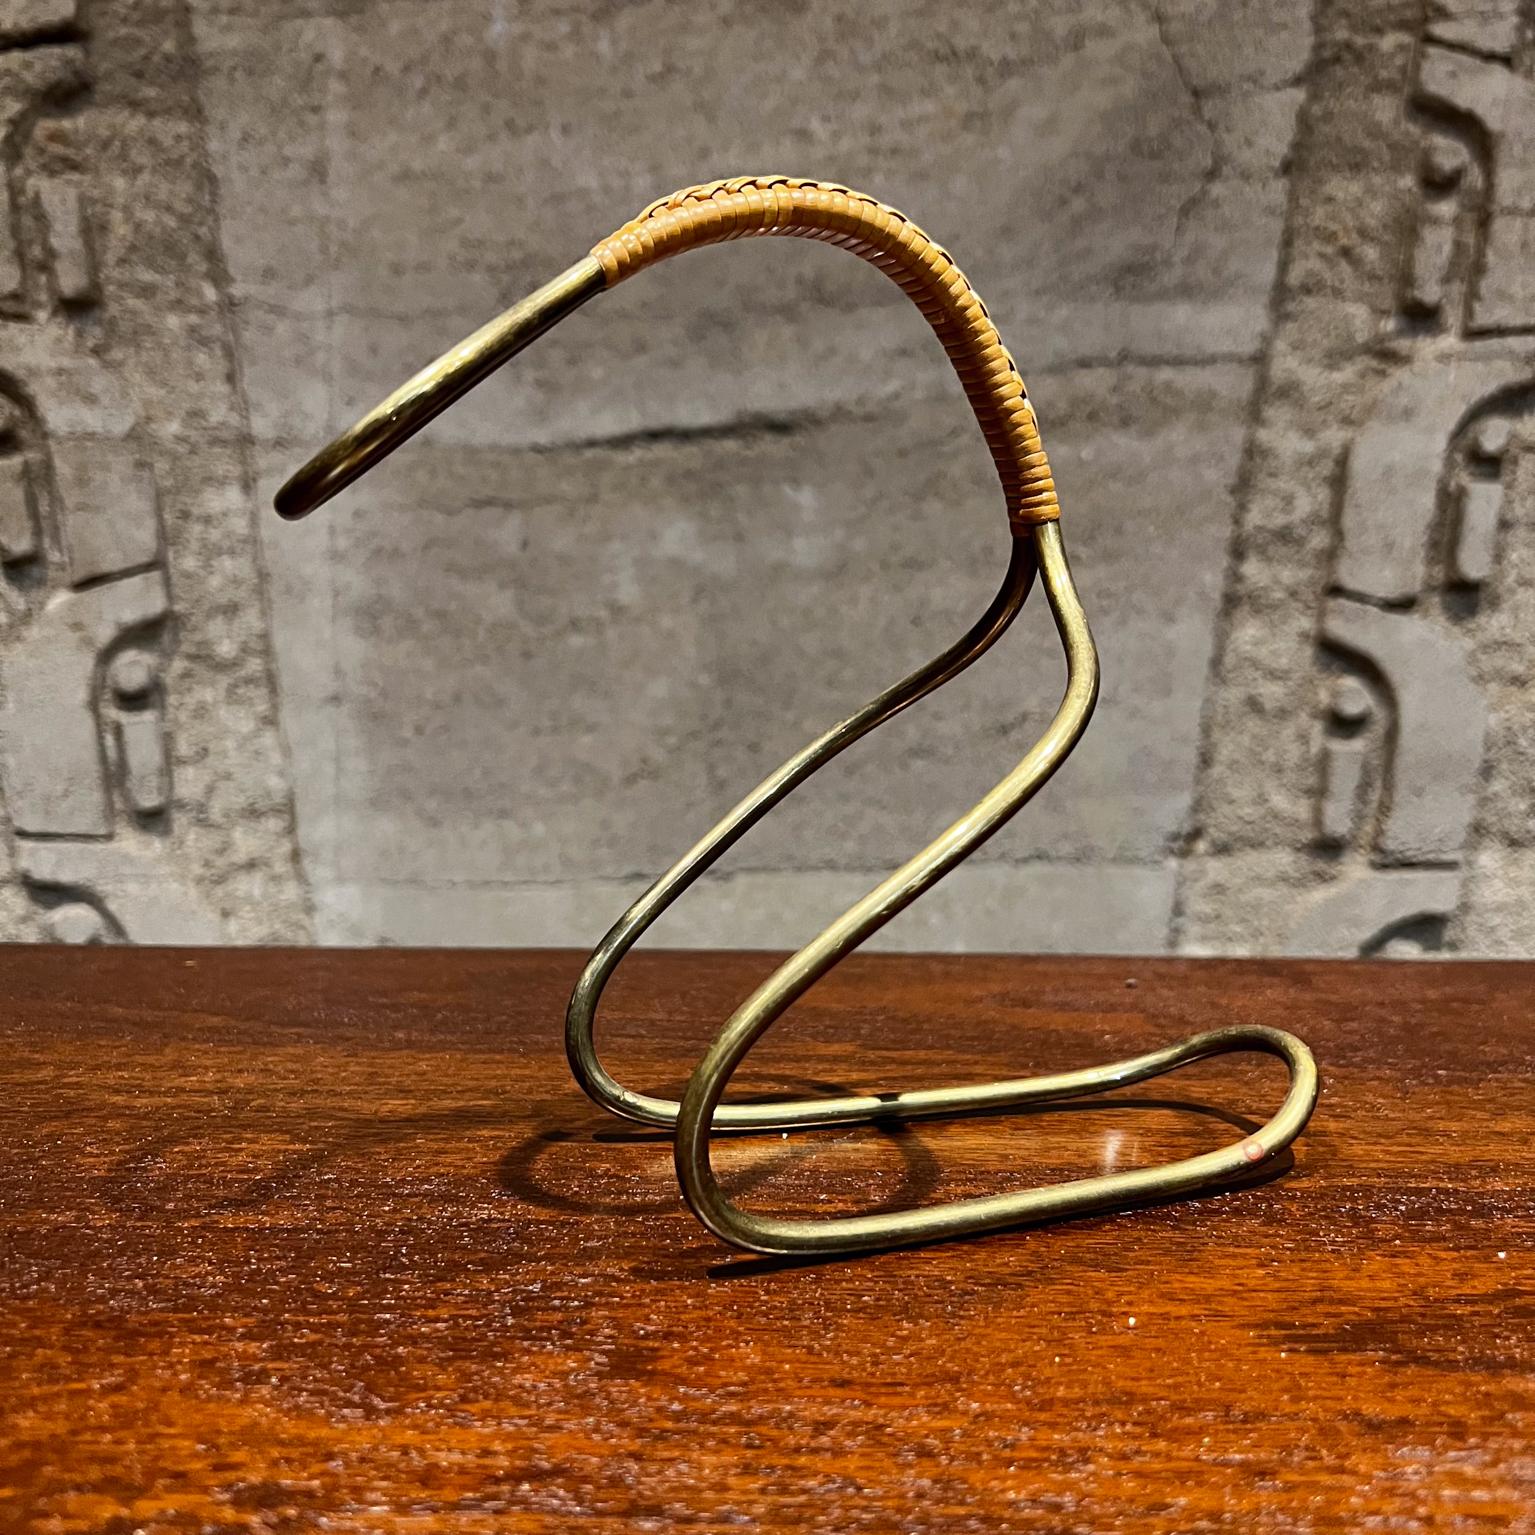 1950s Sculptural Wine Bottle Holder
In the style of Carl Auböck Austria
Marked Orop
Designed in Brass and wrapped Cane 
9 long x 8 tall x 3.75 w inches
Preowned original vintage condition.
Review images carefully.


